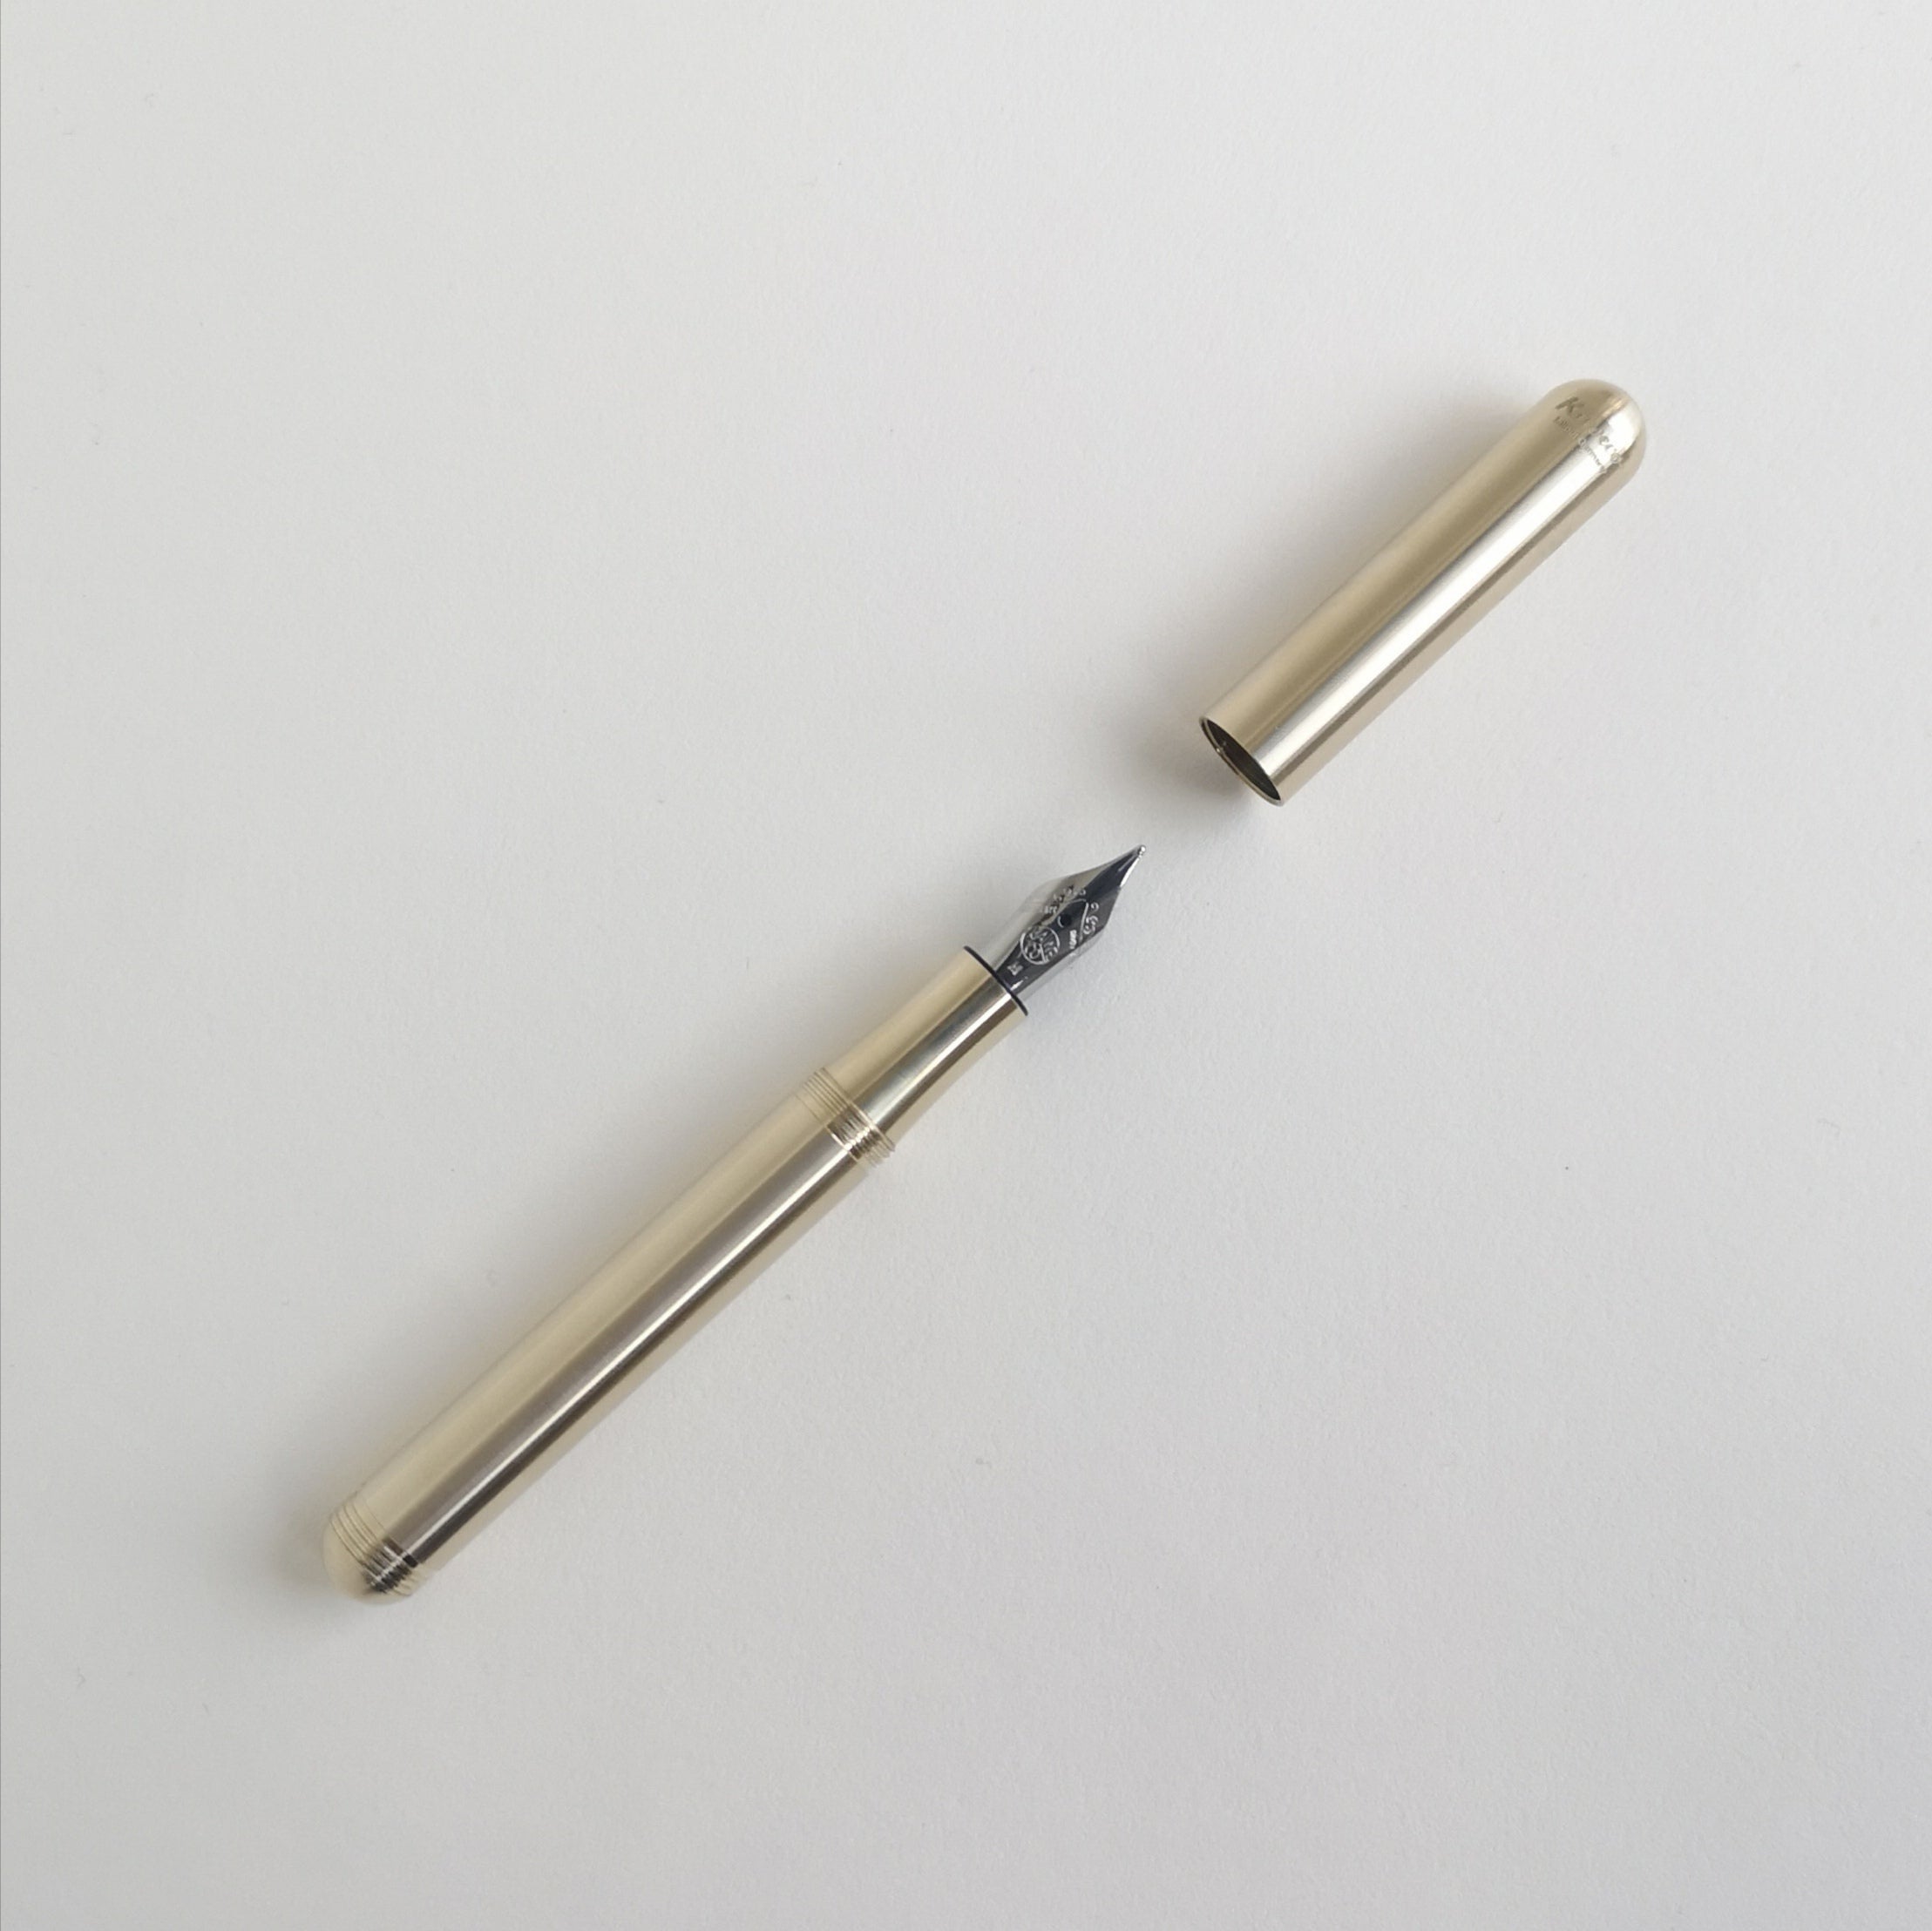 Kaweco Brass Liliput Fountain Pen with cap off